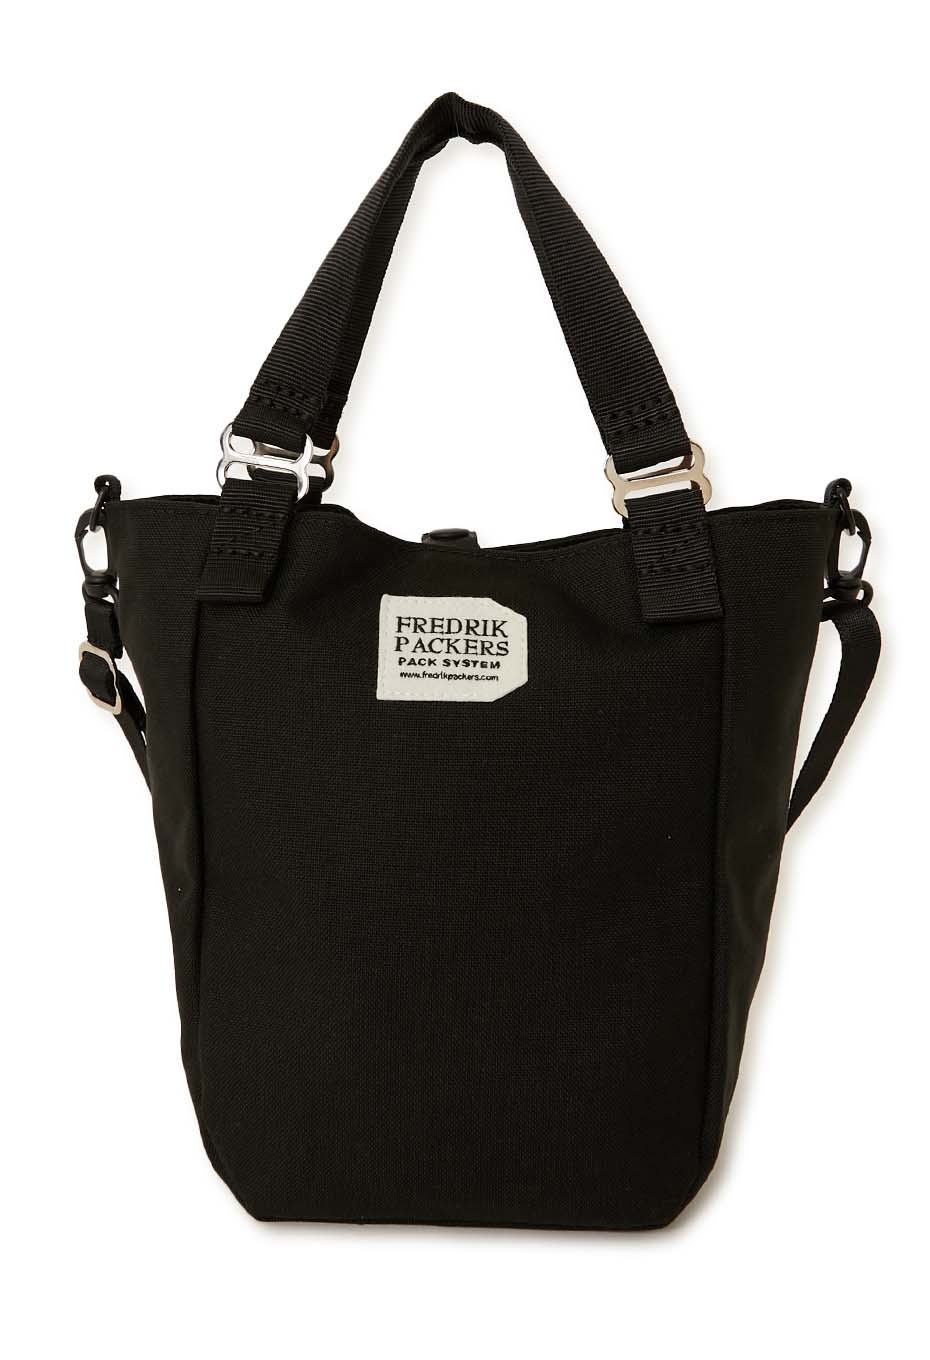 FREDRIK PACKERS 1000D Mission Tote Bag XS /WHITE LABEL